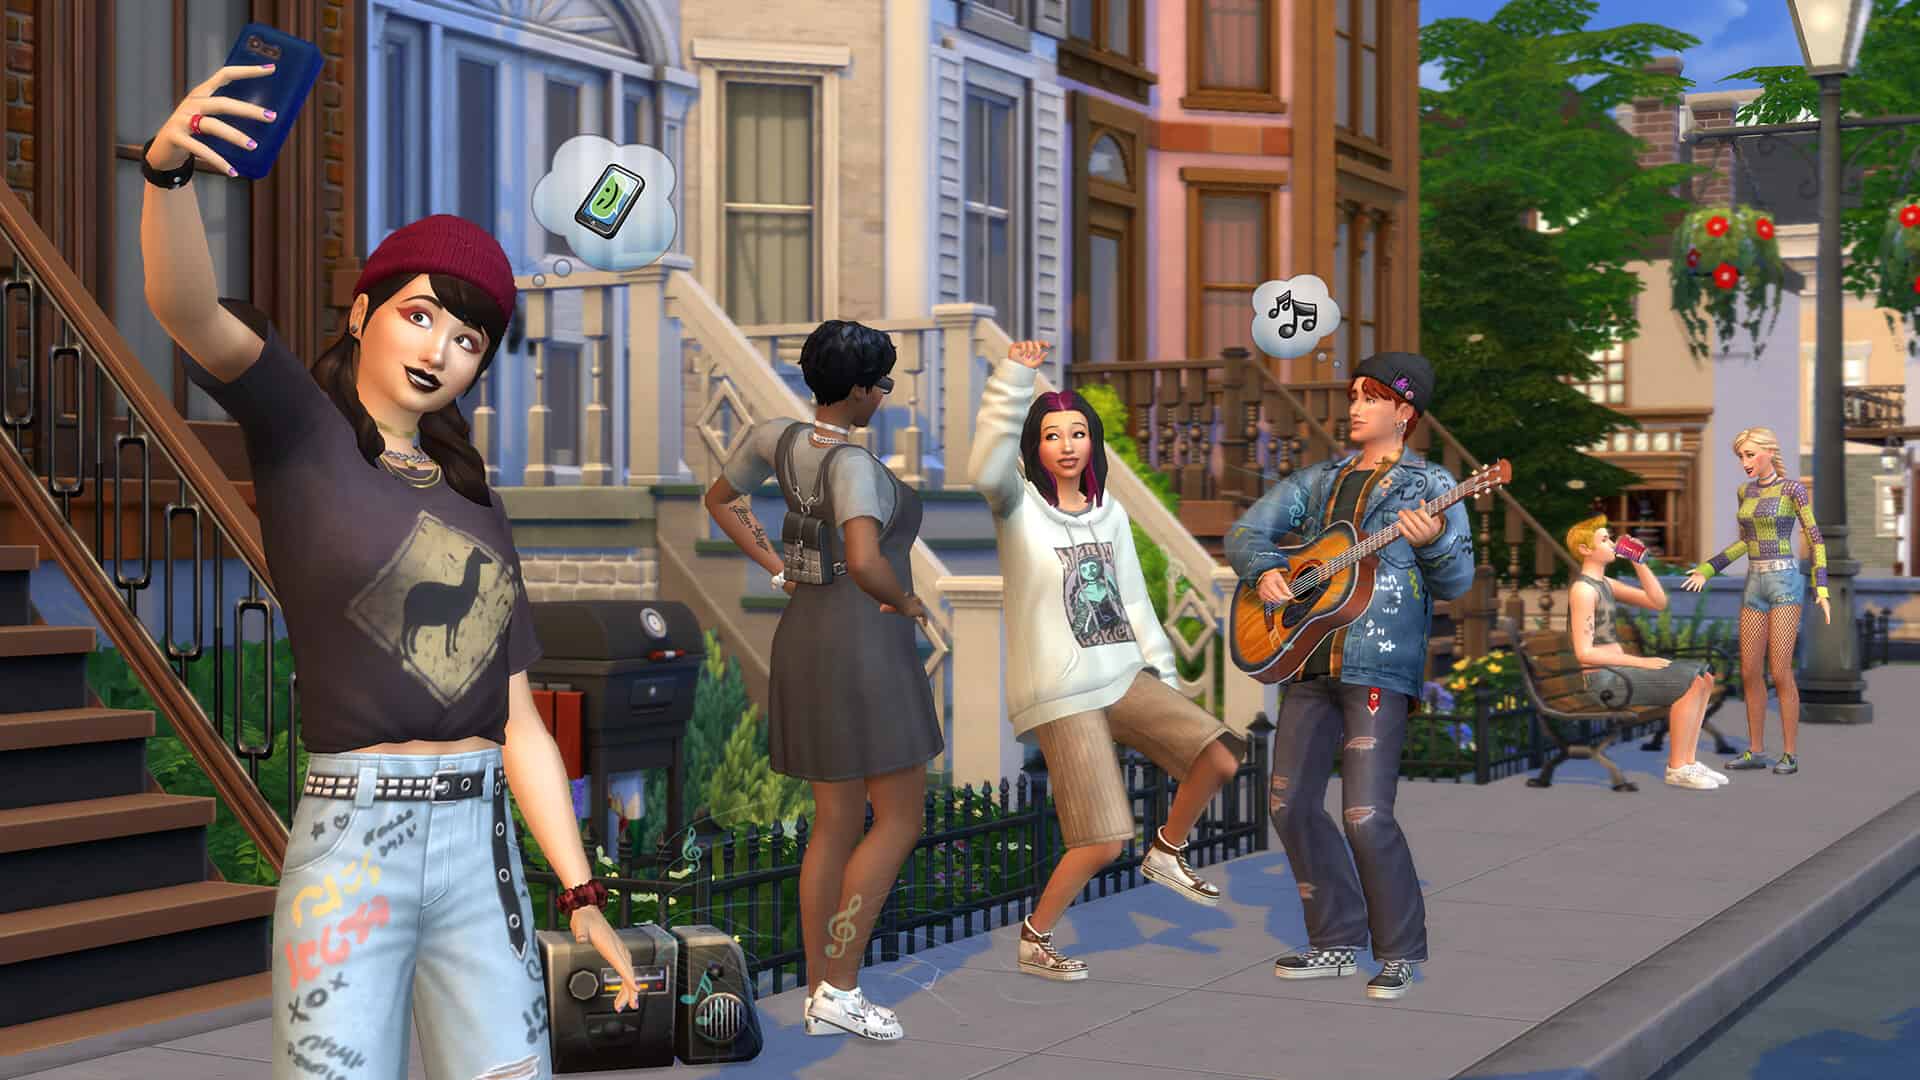 A Steam promotional image from The Sims 4.